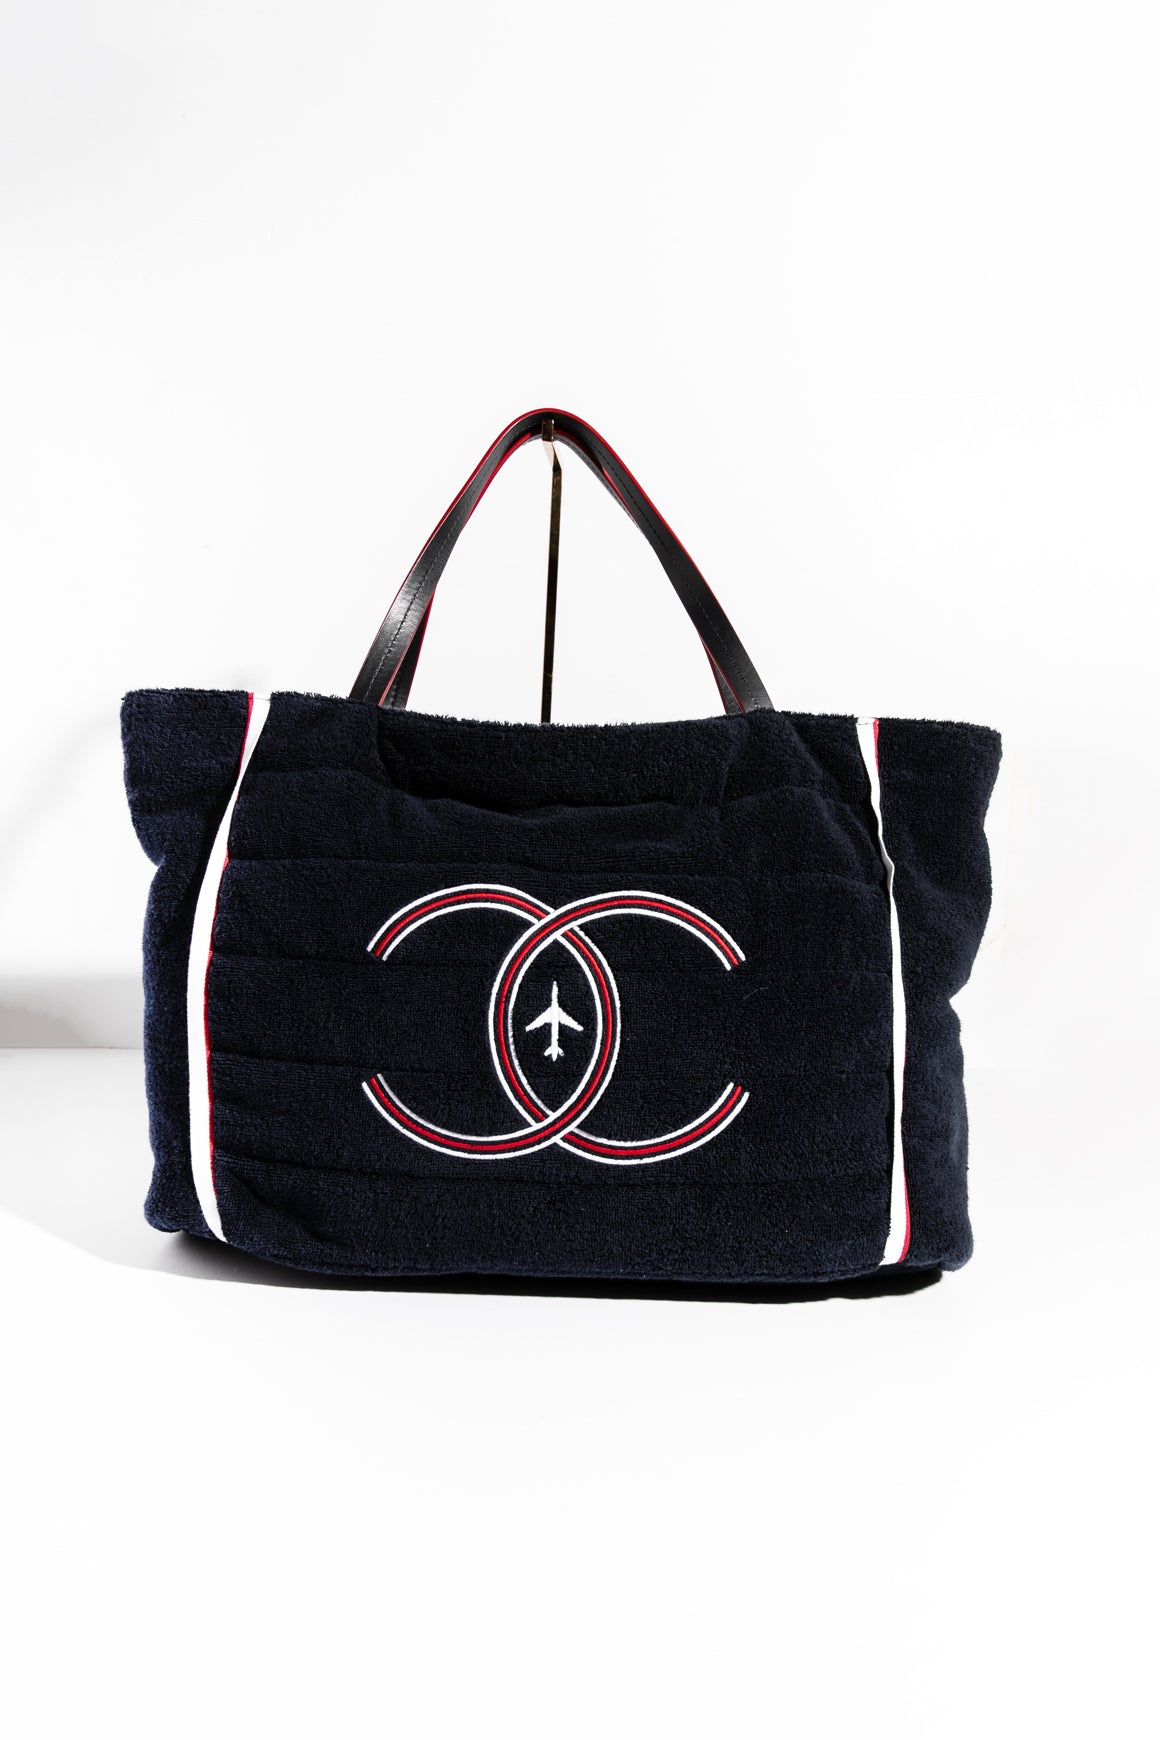 CHANEL 2016 Reversible Navy Terrycloth Airline Tote